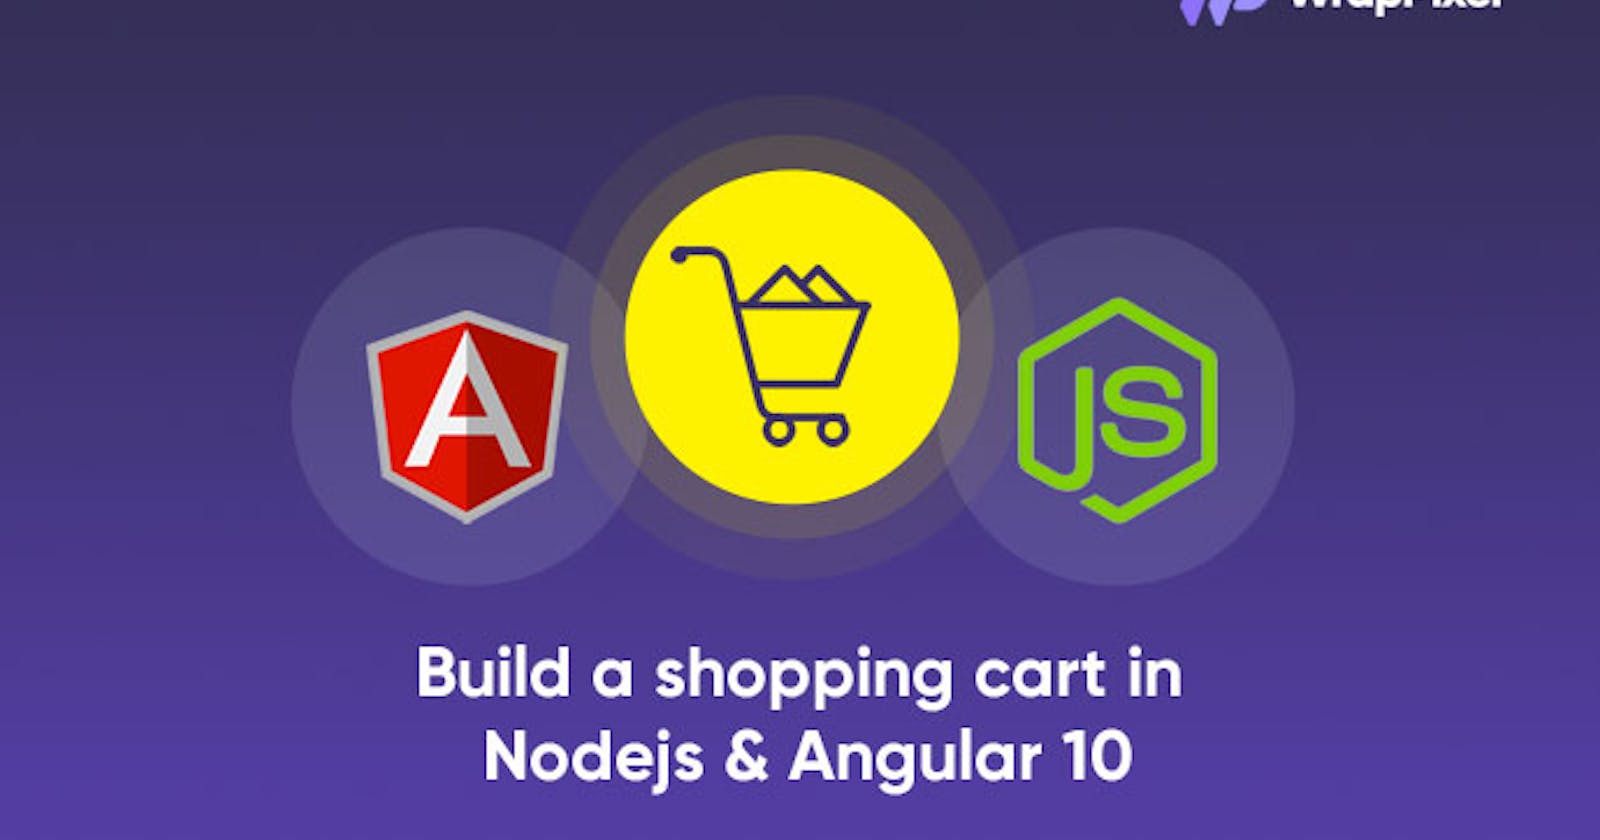 Build a shopping cart in Nodejs and Angular10